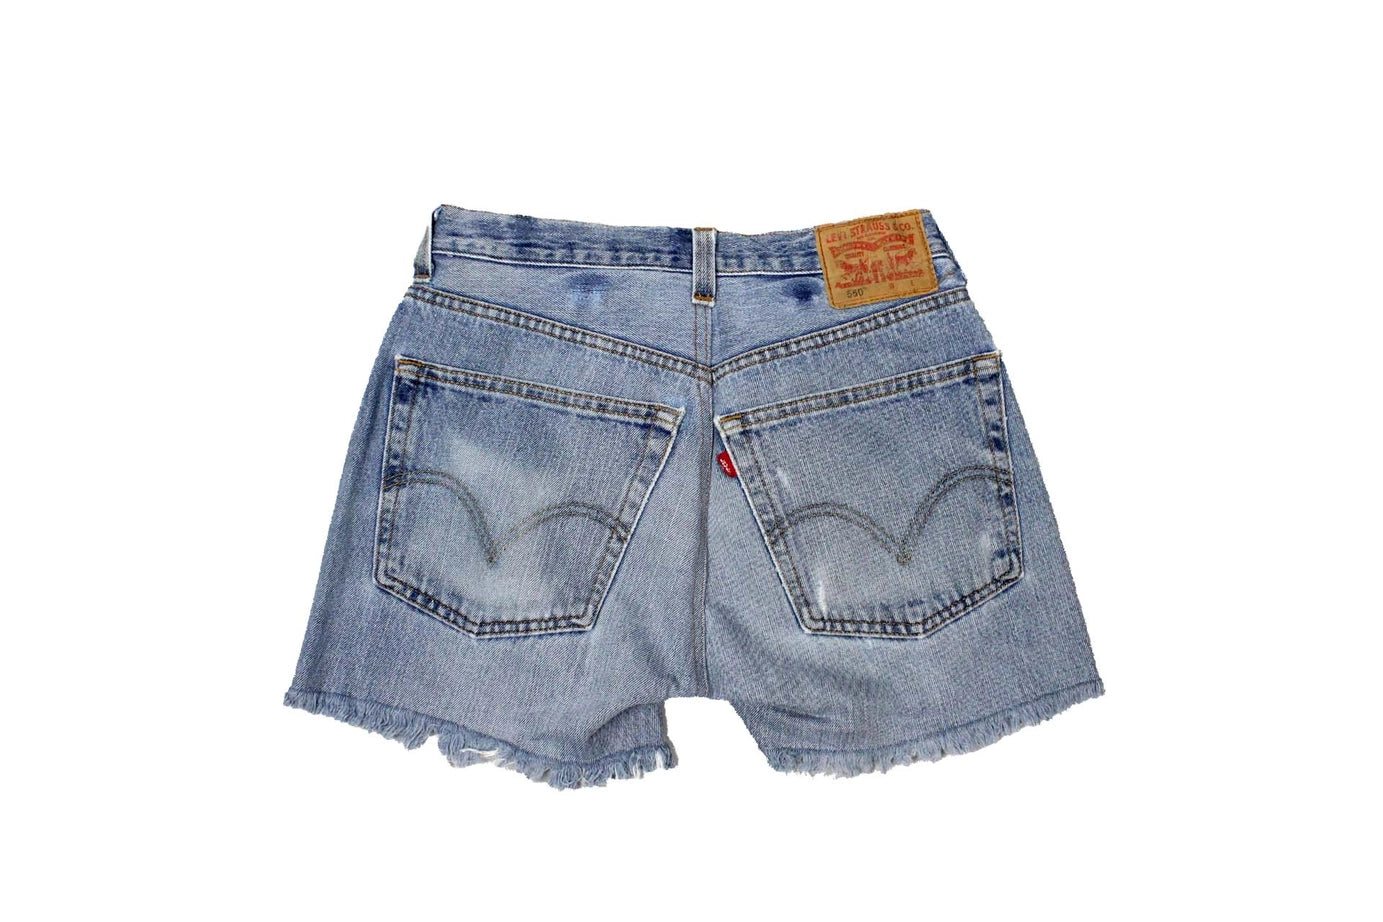 Sun's Out - Mid-Rise Upcycled Denim Straight-Cut Shorts